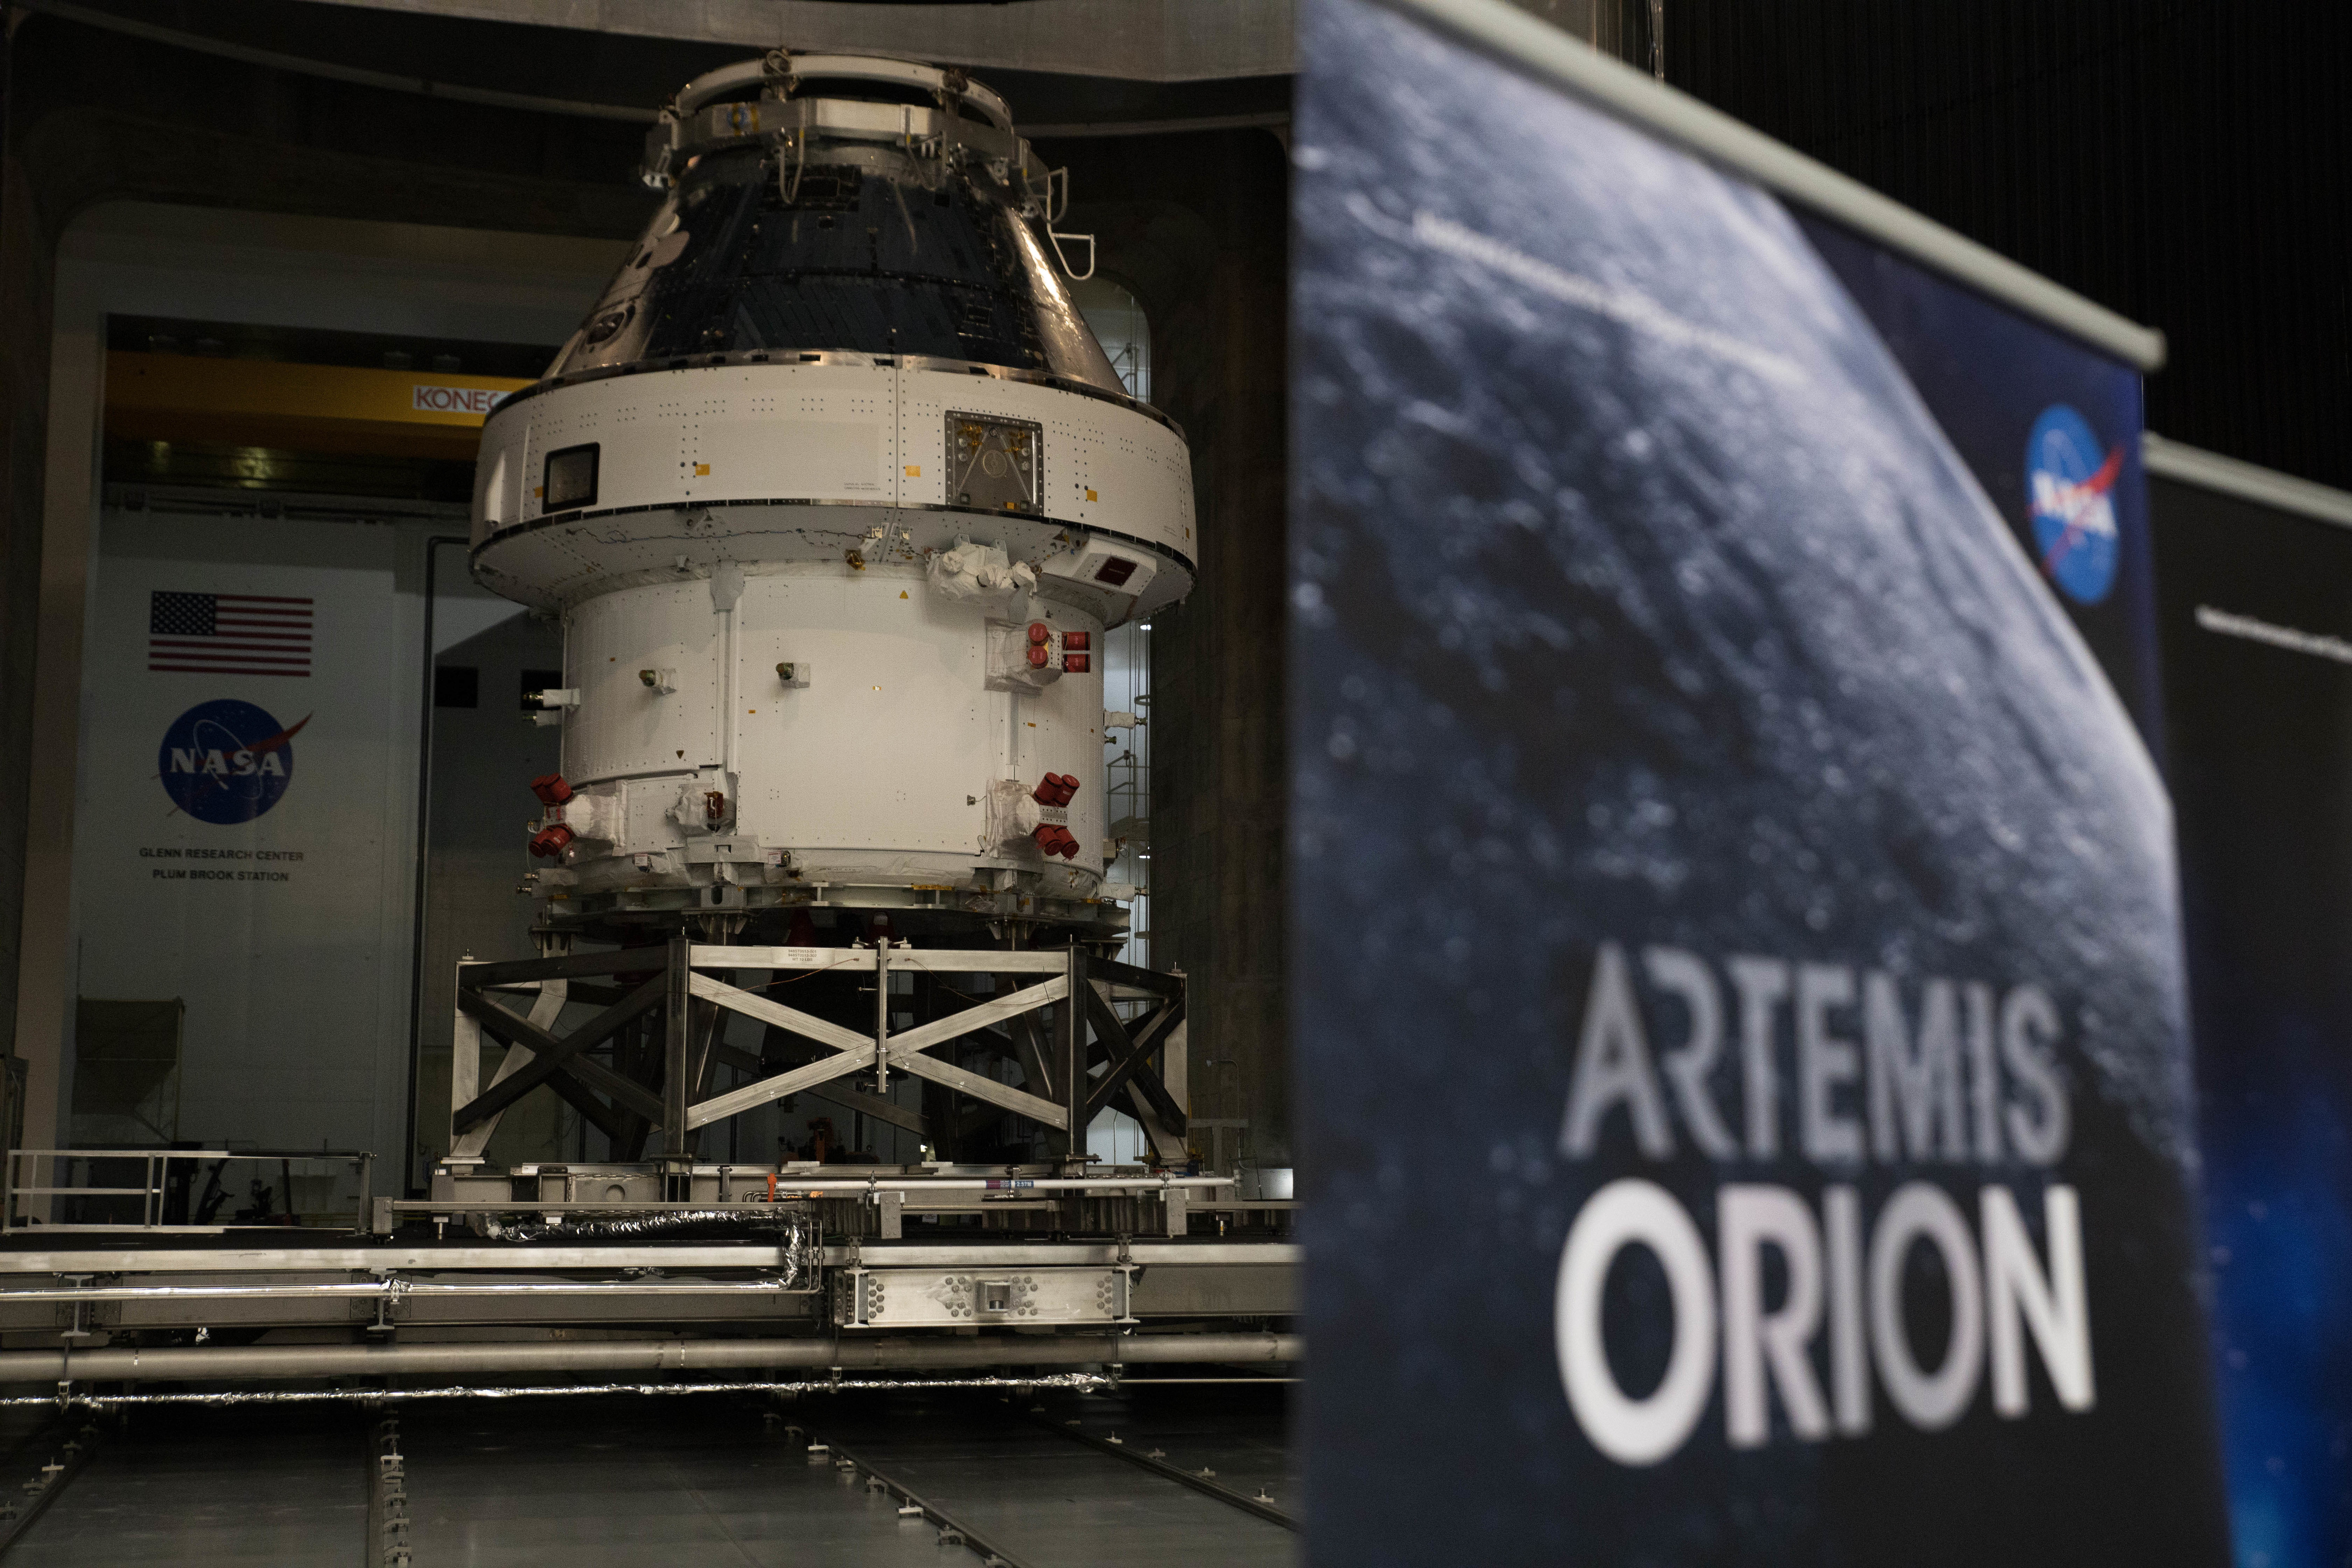 Spacecraft with Artemis Orion logo